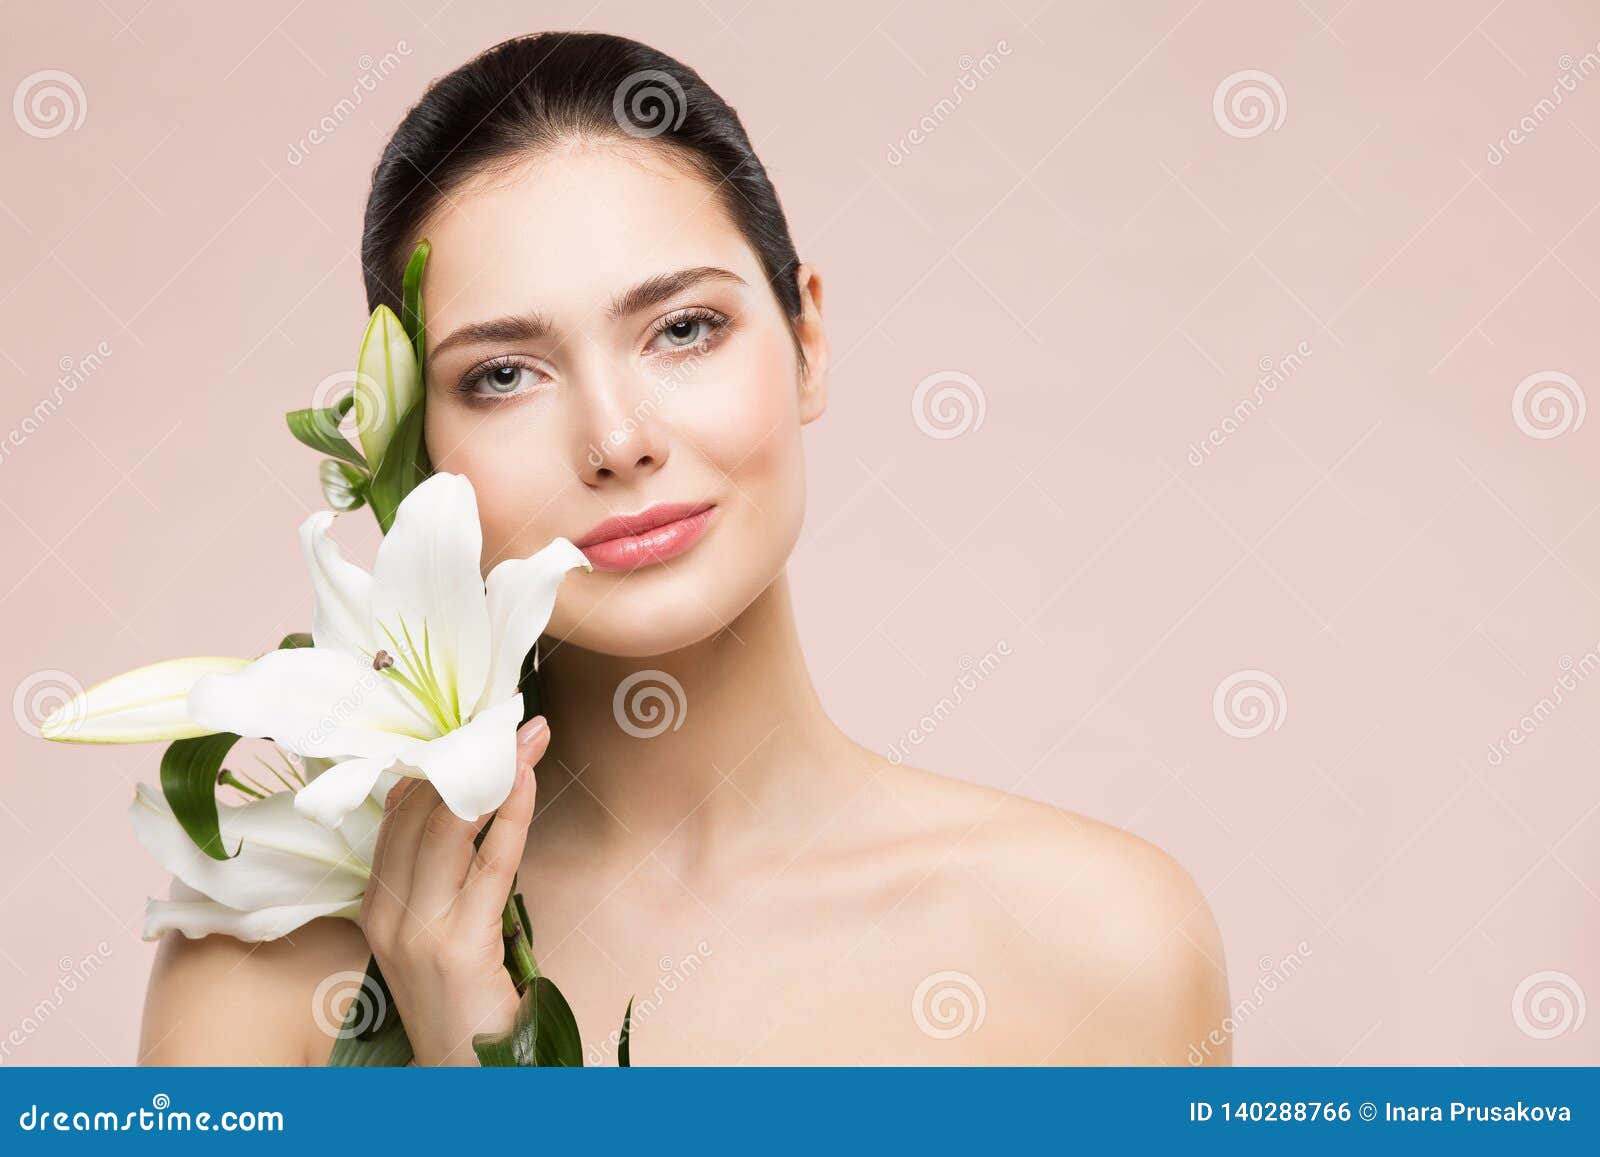 woman beauty natural makeup portrait with lily flower, happy girl face skin care and treatment